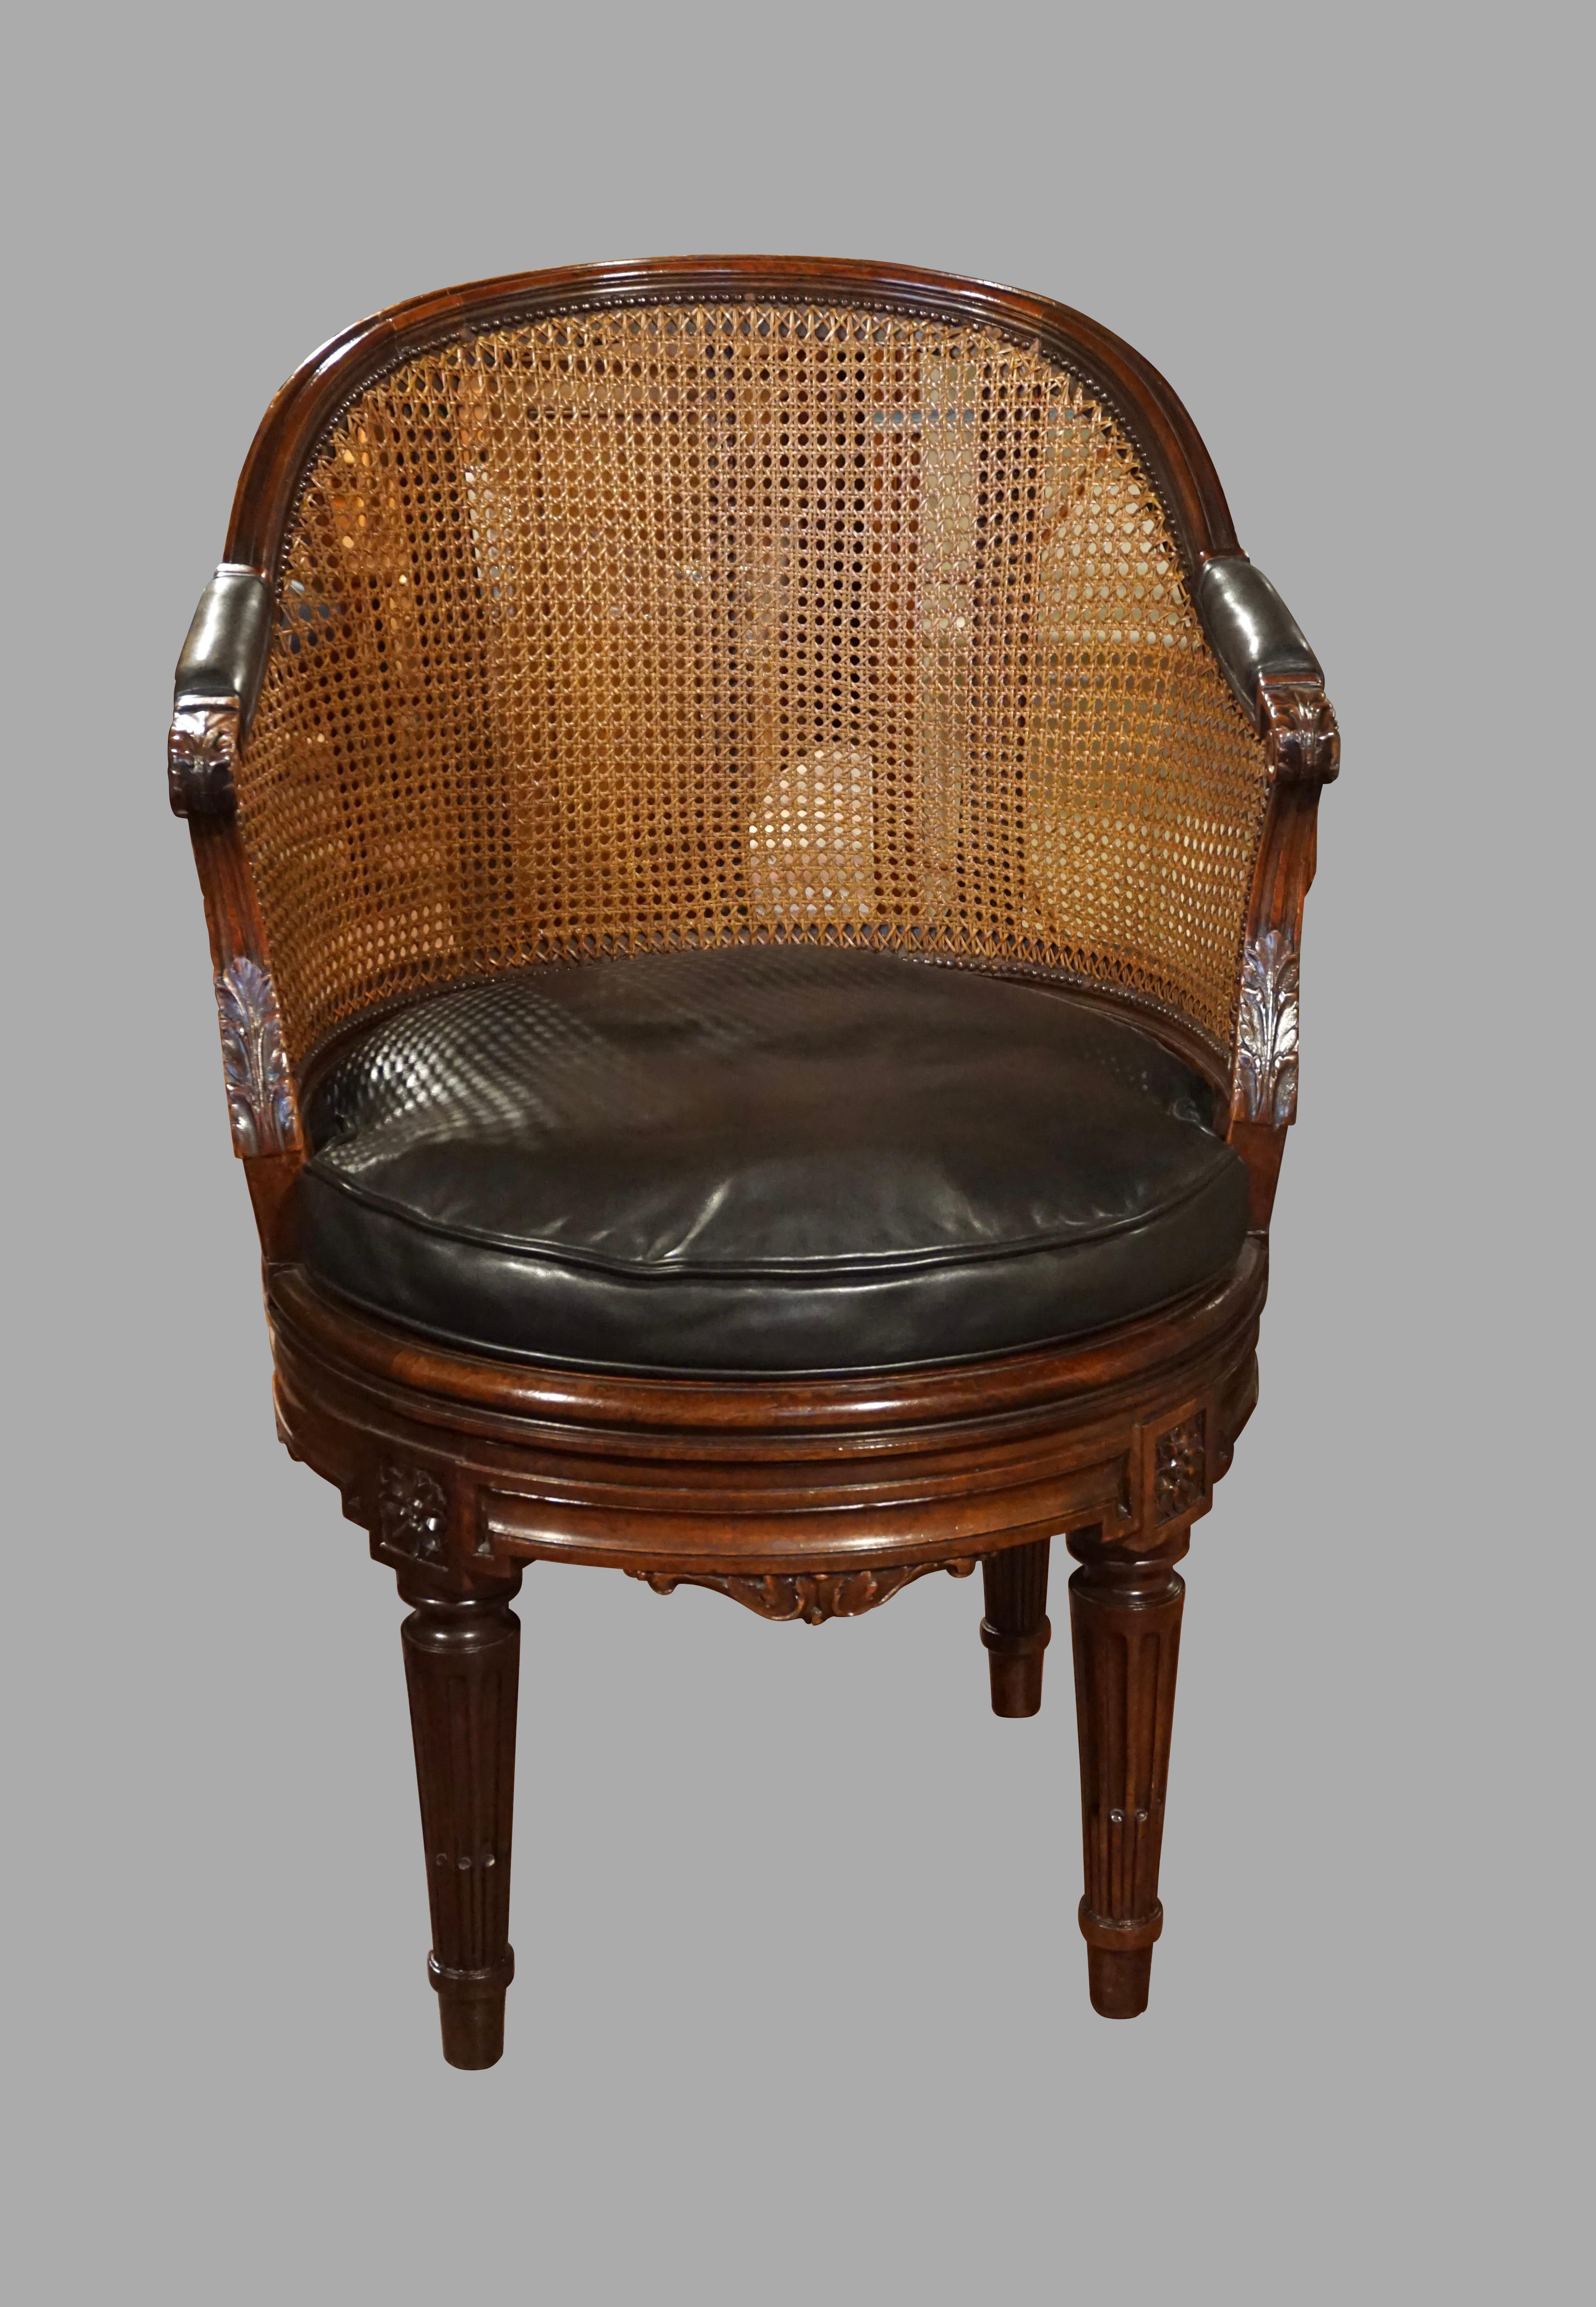 A stylish and very well-made French Louis XVI style mahogany armchair, the caned seat and back in excellent condition, the seat with a dark green leather cushion. This is a wonderful and quite comfortable swivel desk chair with a curved back and